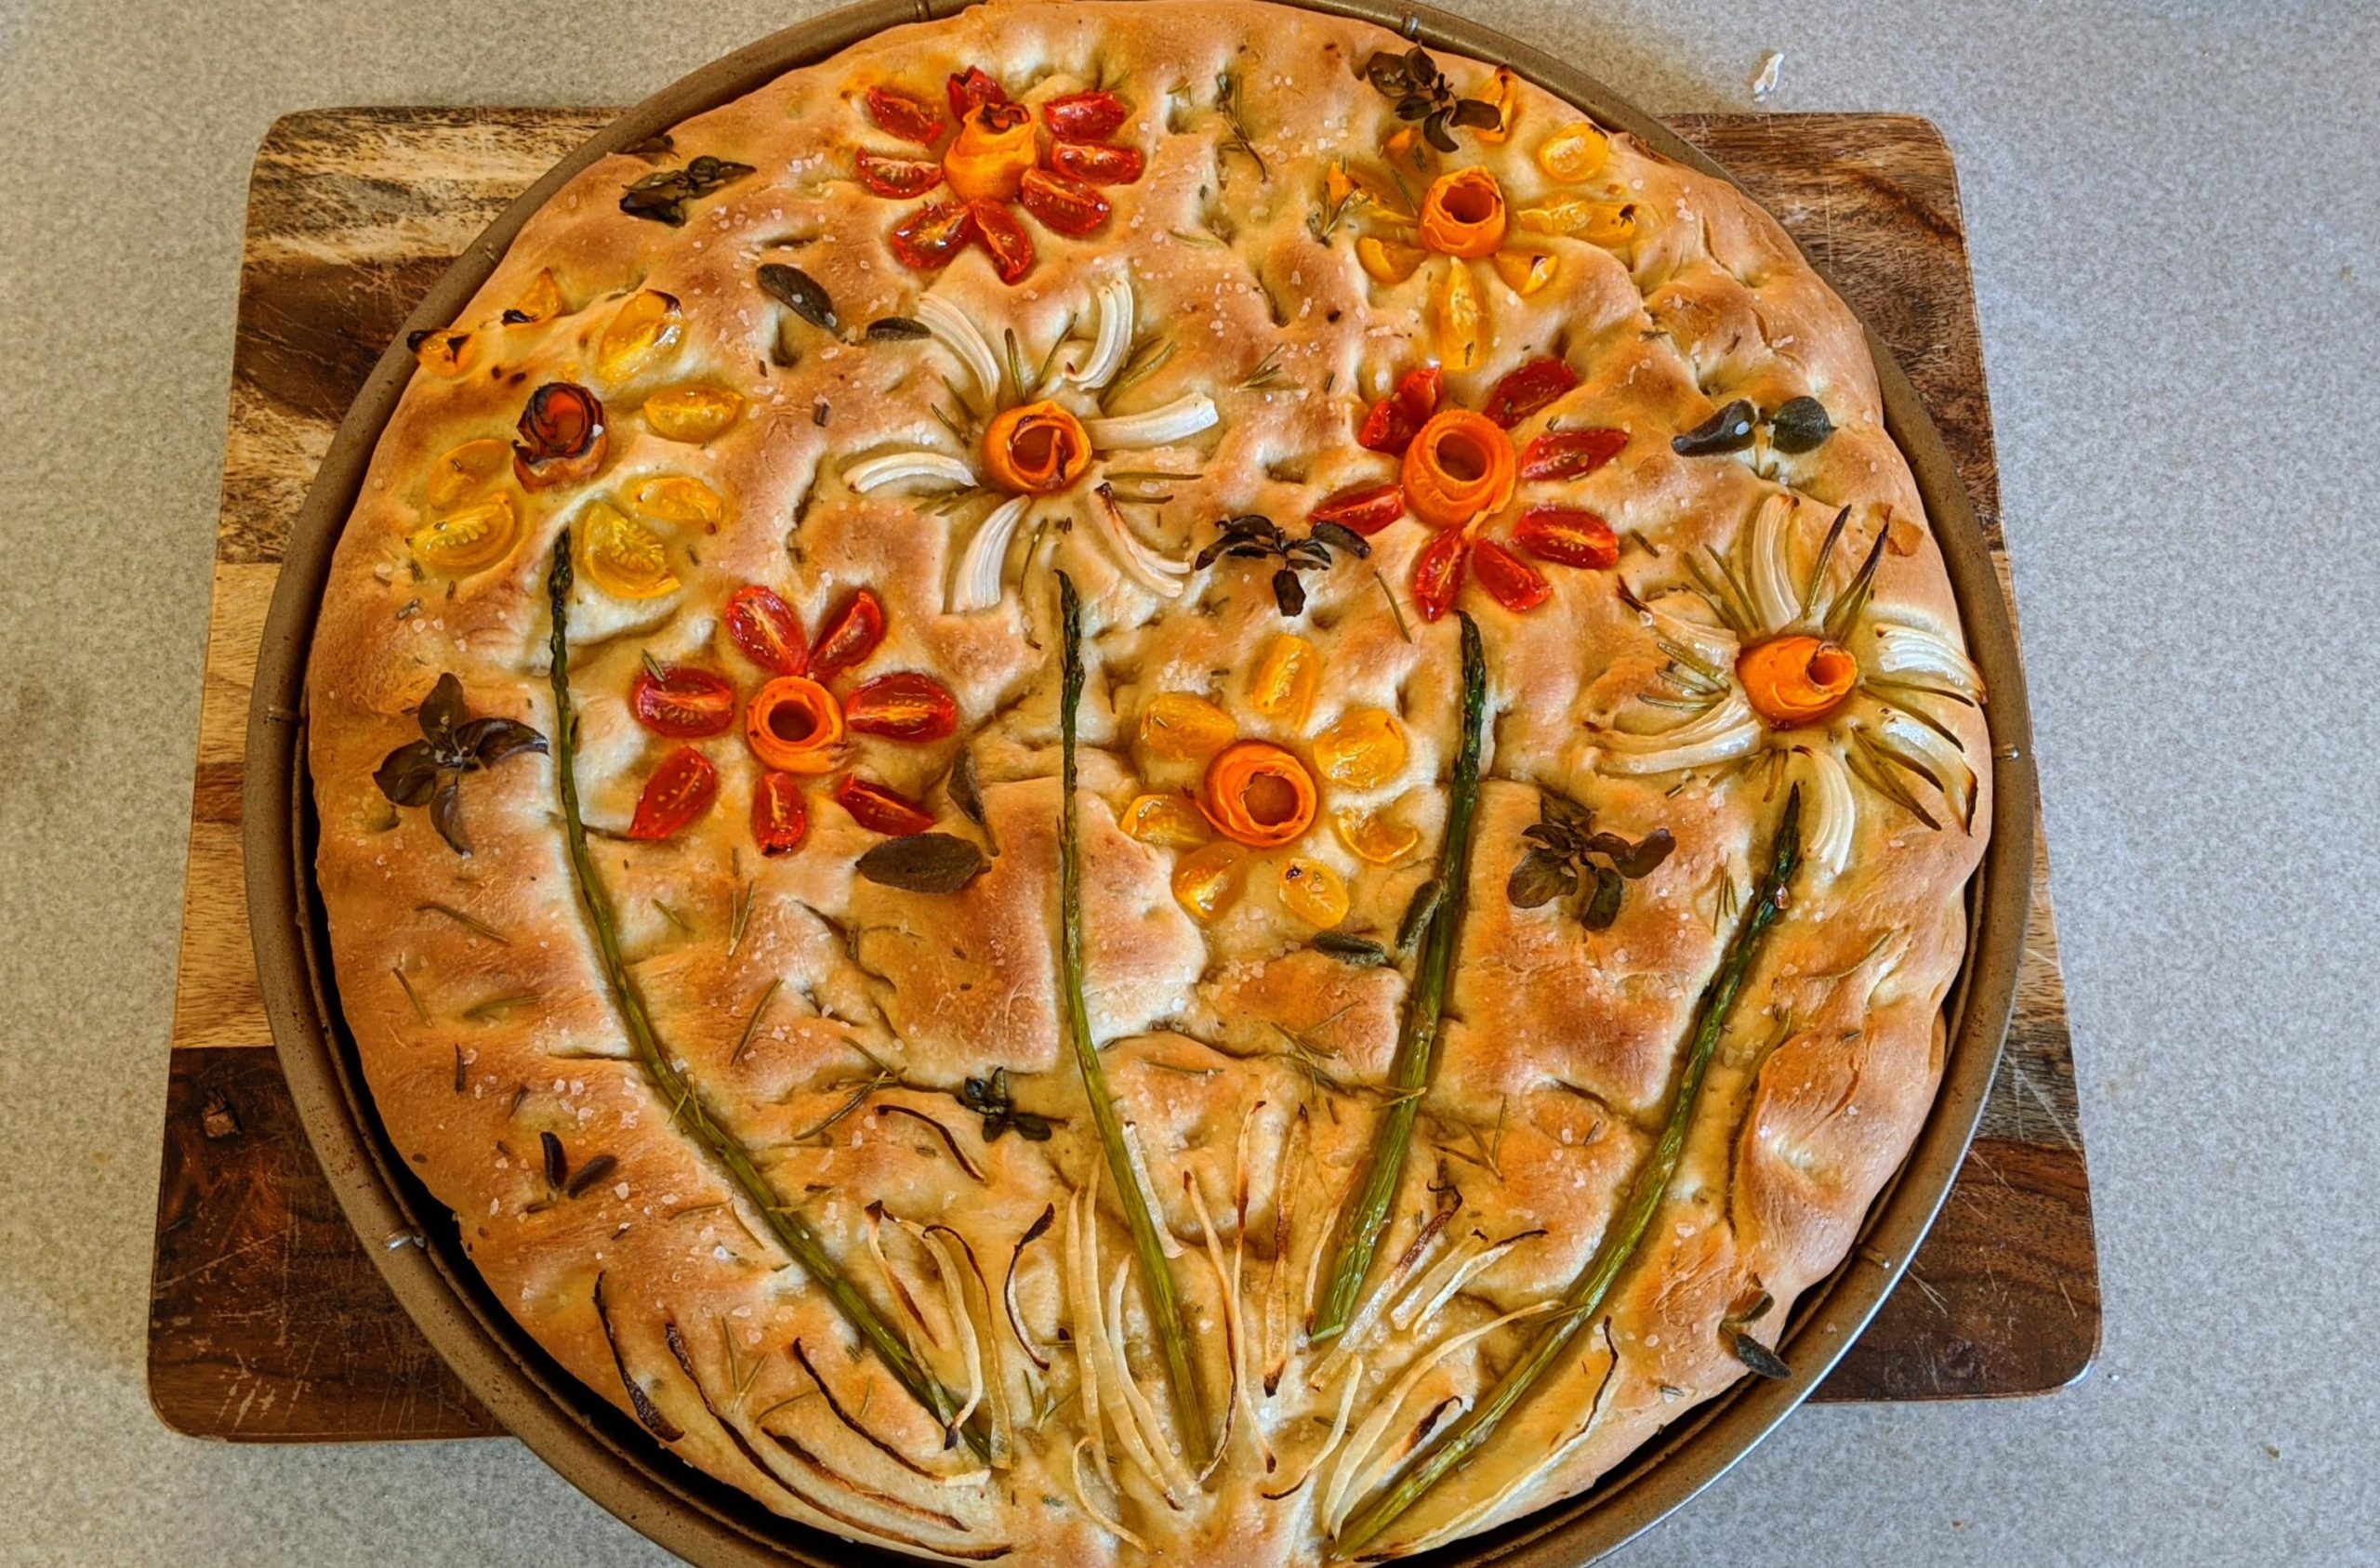 My first focaccia. Had some fun with it! - Dining and Cooking